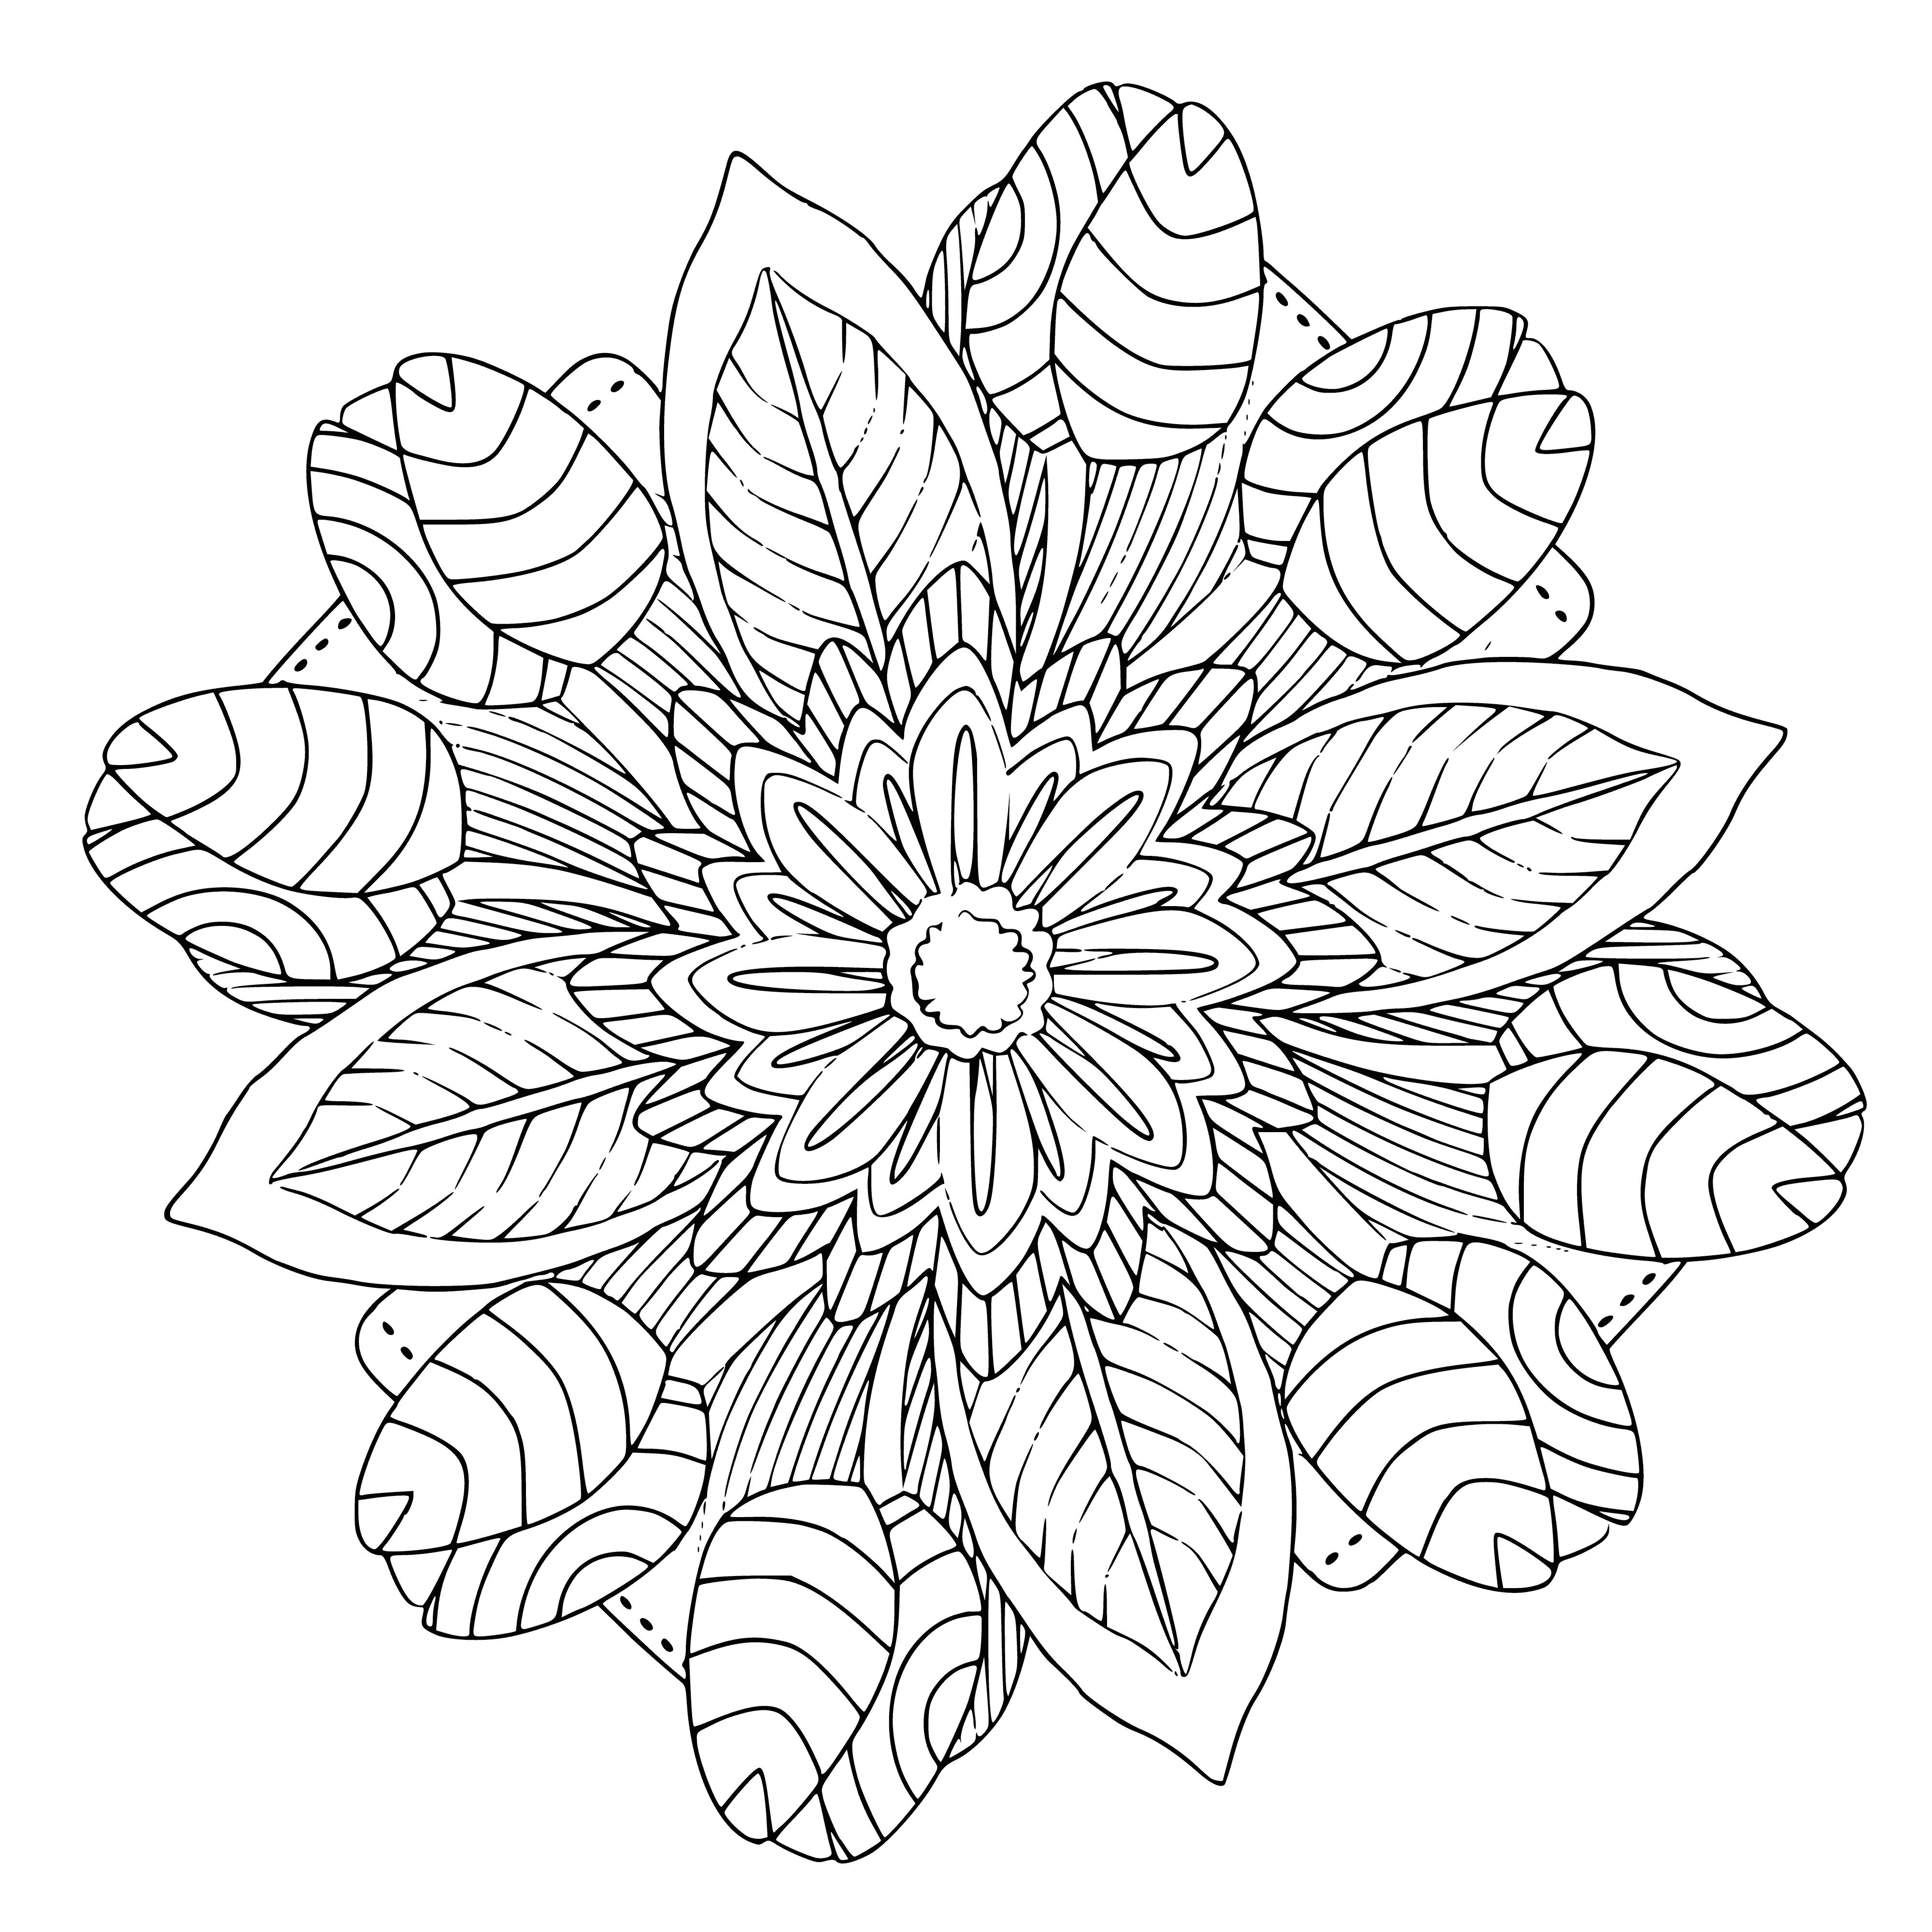 coloring page: Color a beautiful mandala with tulips to relax and enjoy detailed patterns!